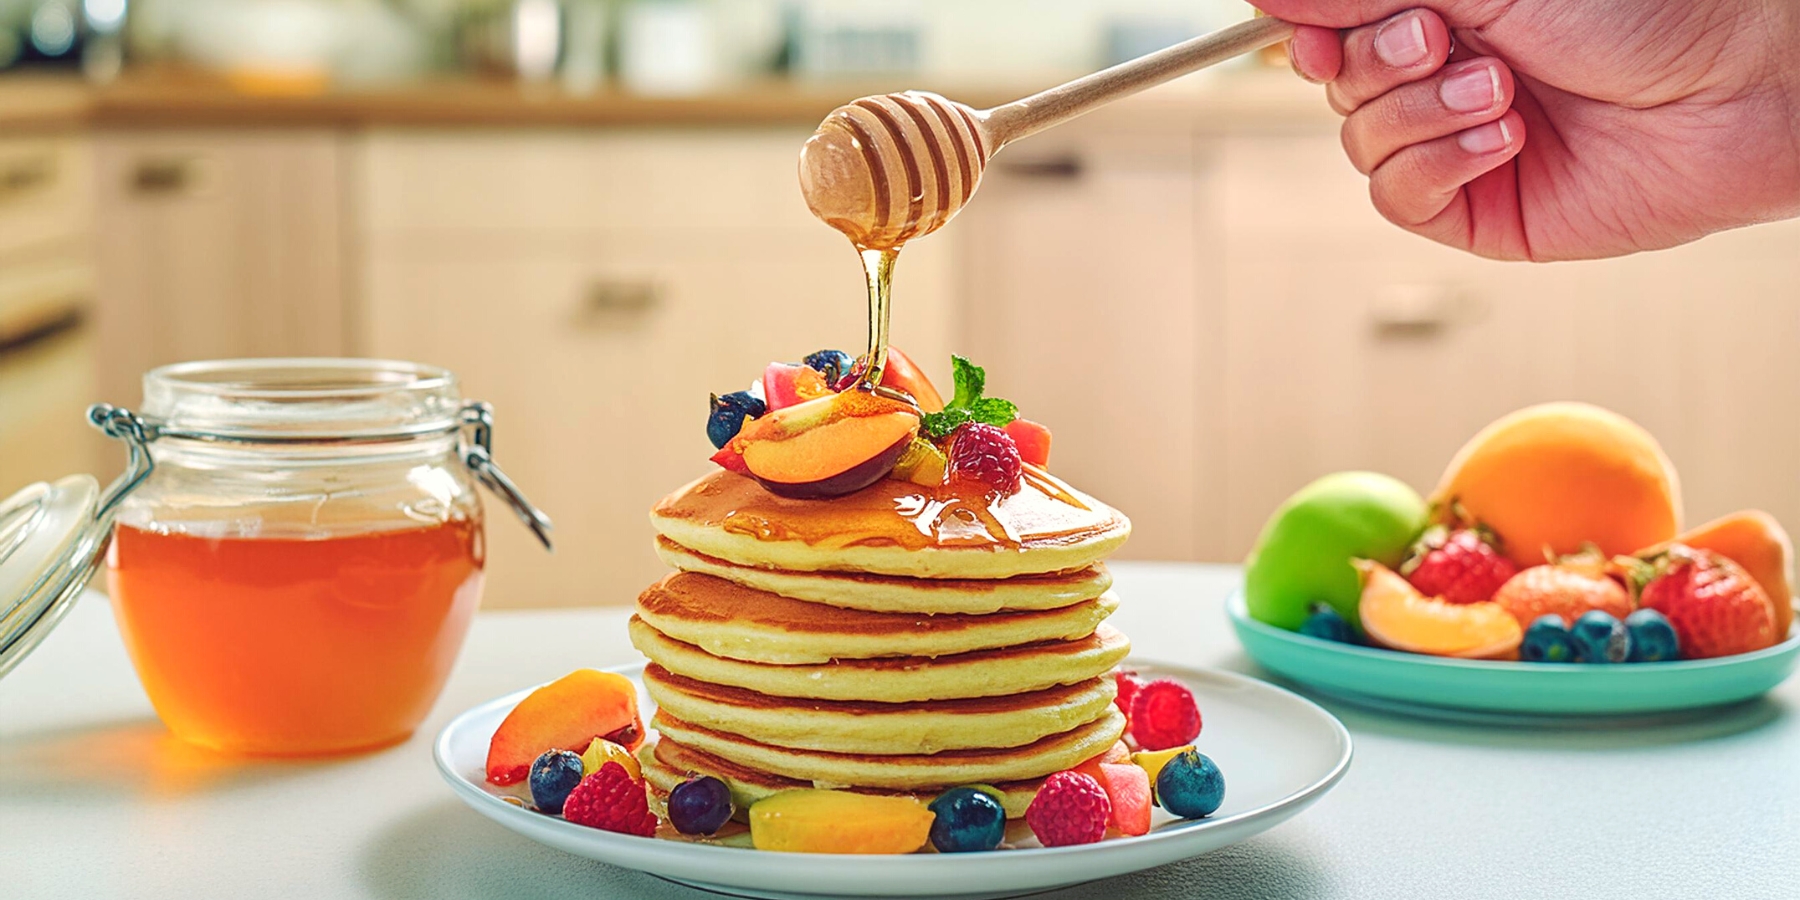 A hand holding a honey spoon and drizzling honey onto a stack of pancakes and fruit